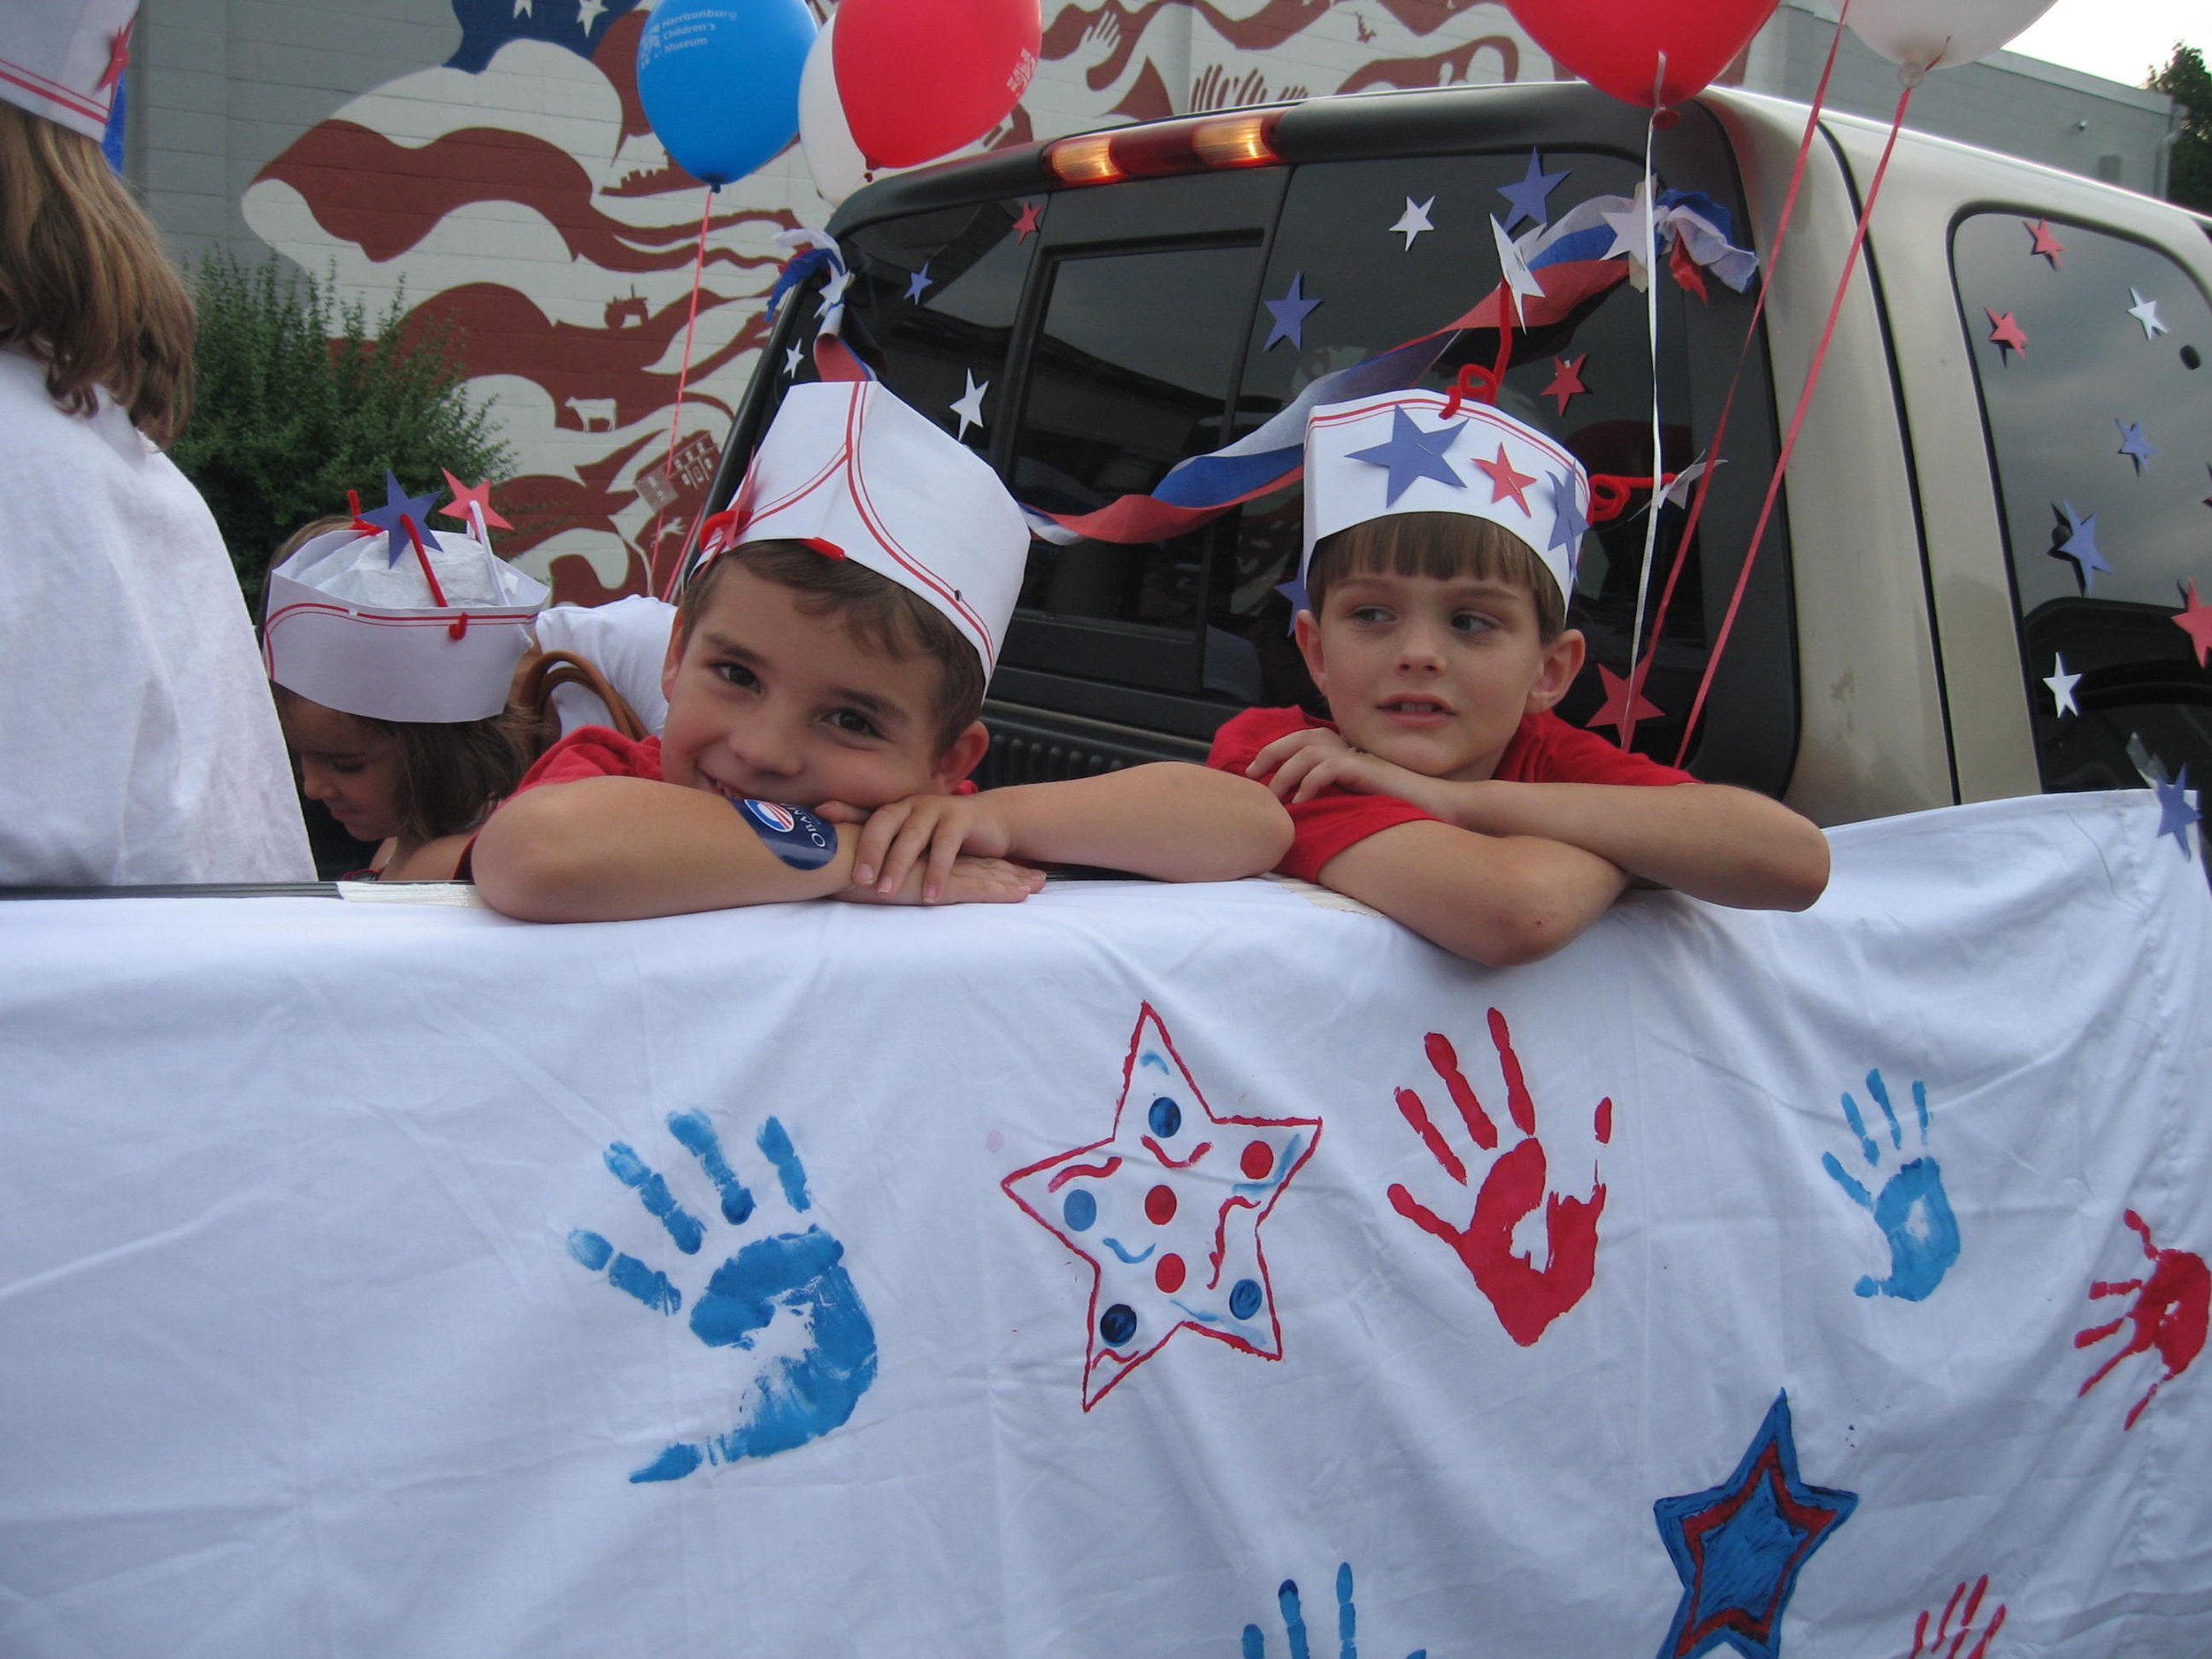  The Museum regularly participated in the 4th of July parade in downtown Harrisonburg.  